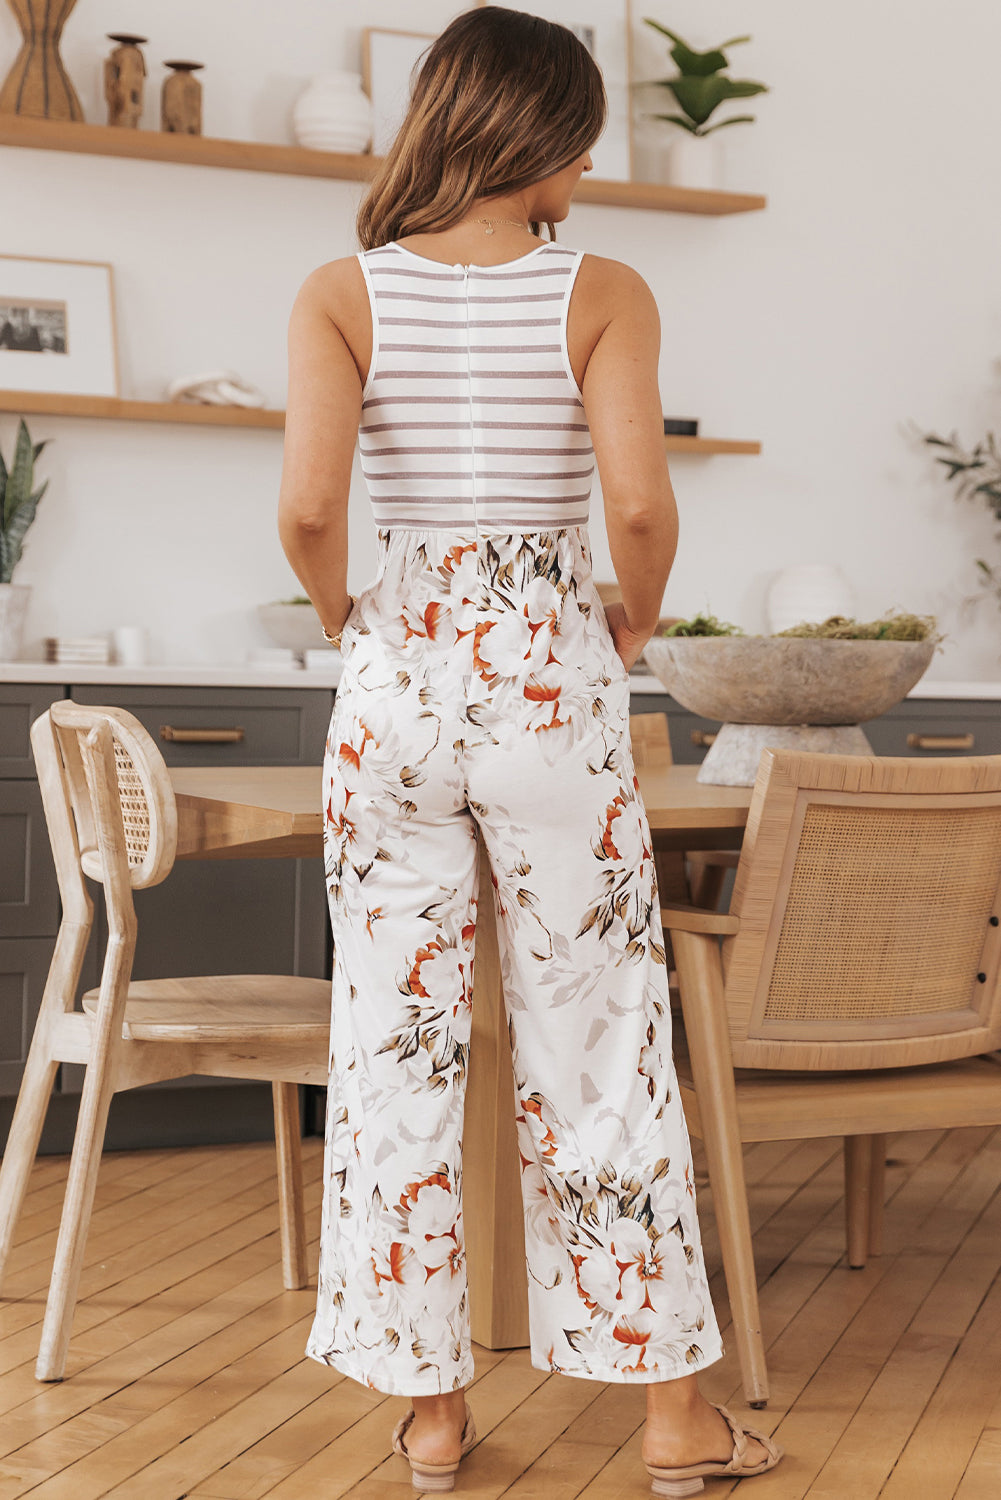 Striped Floral Sleeveless Wide Leg Jumpsuit with Pockets - Shop women apparel, Jewelry, bath & beauty products online - Arwen's Boutique